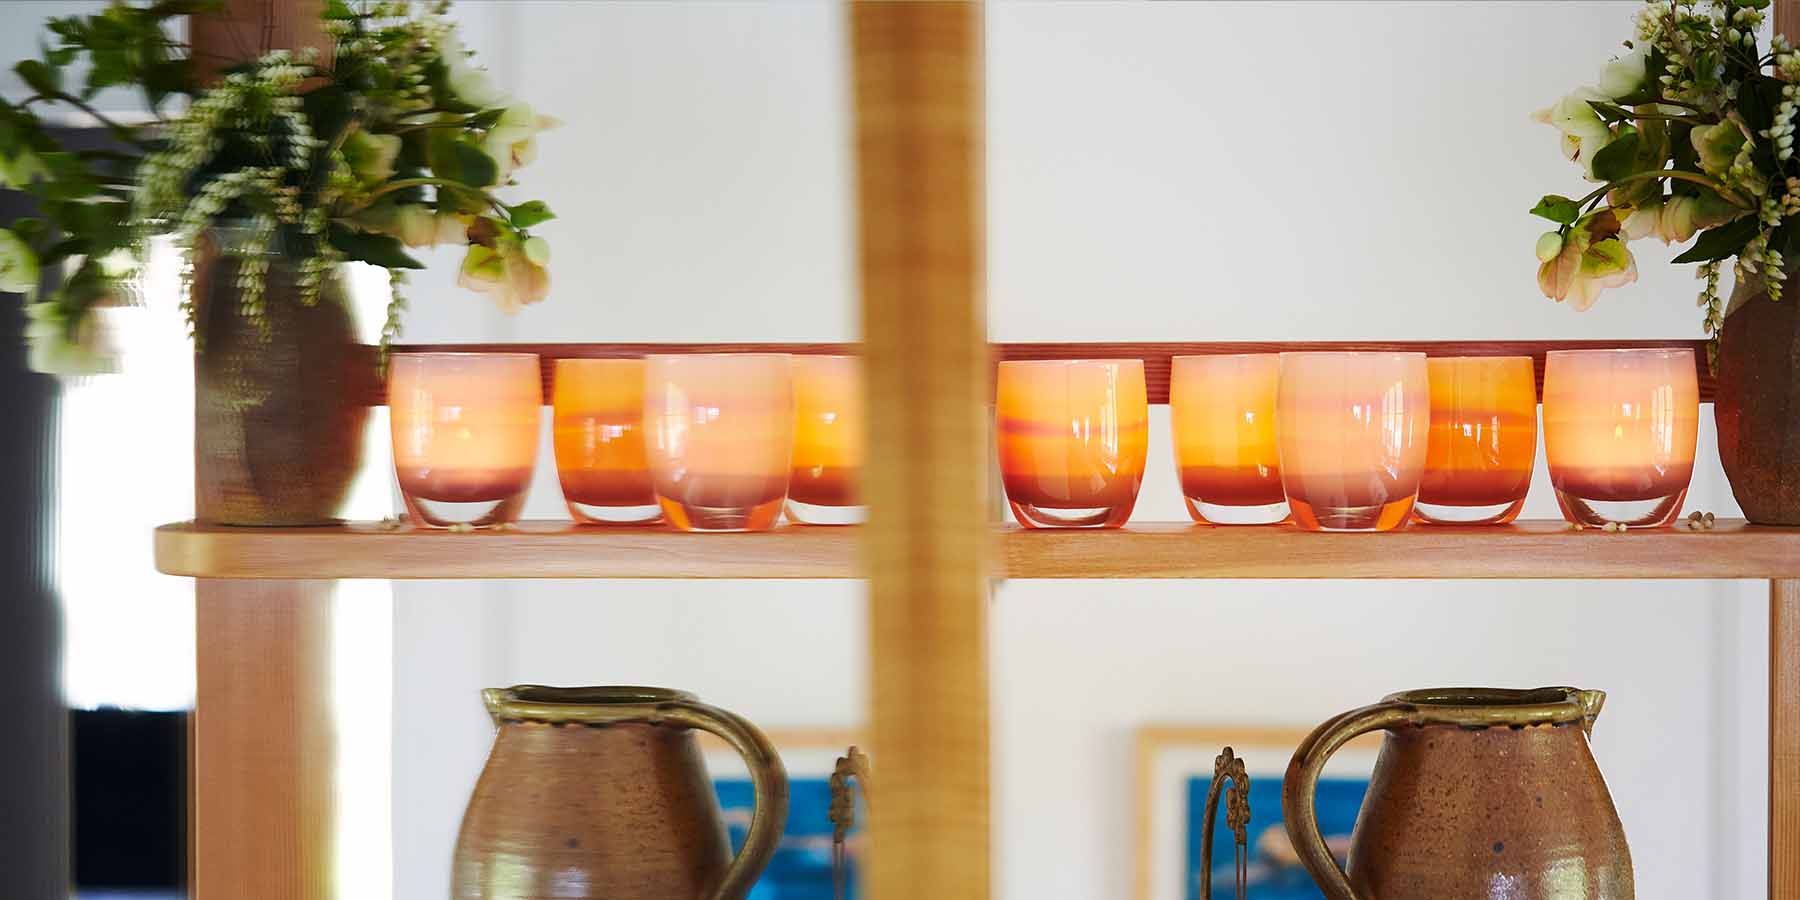 nurture, warm peachy with purple banding, hand-blown glass votive candle holder lined up on a shelf.